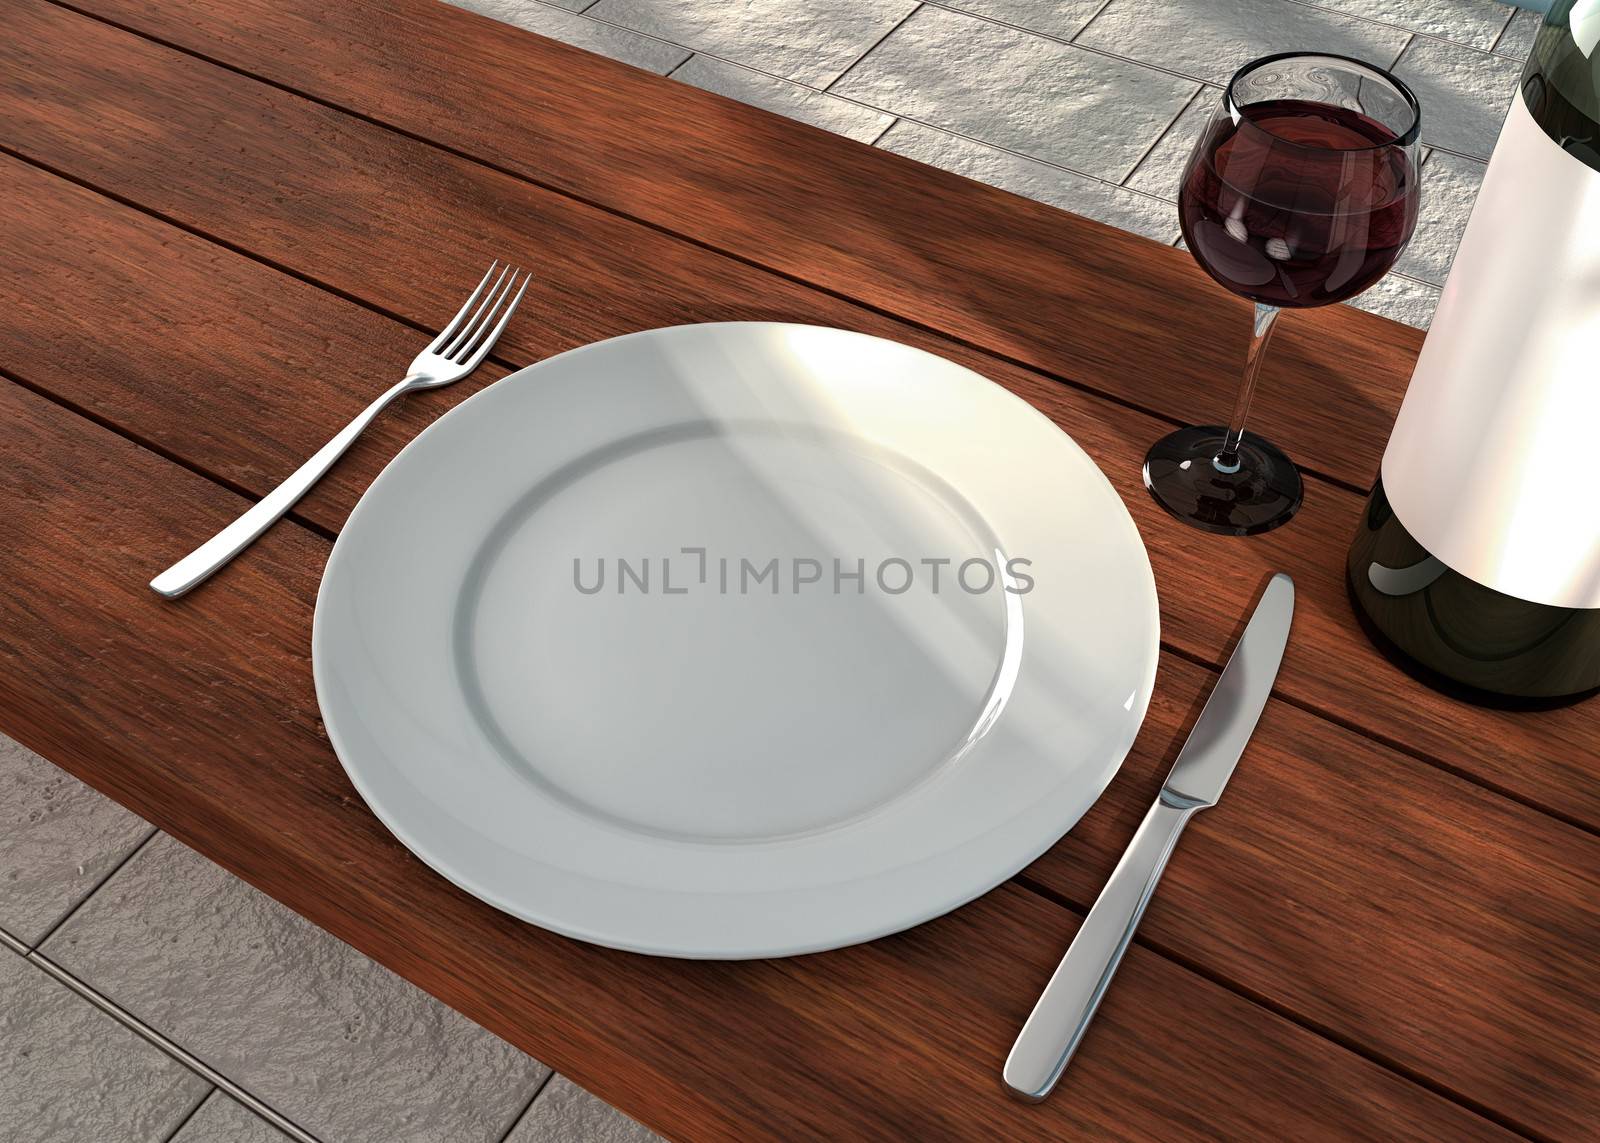 Knife, fork, wine and white dish on the dining table